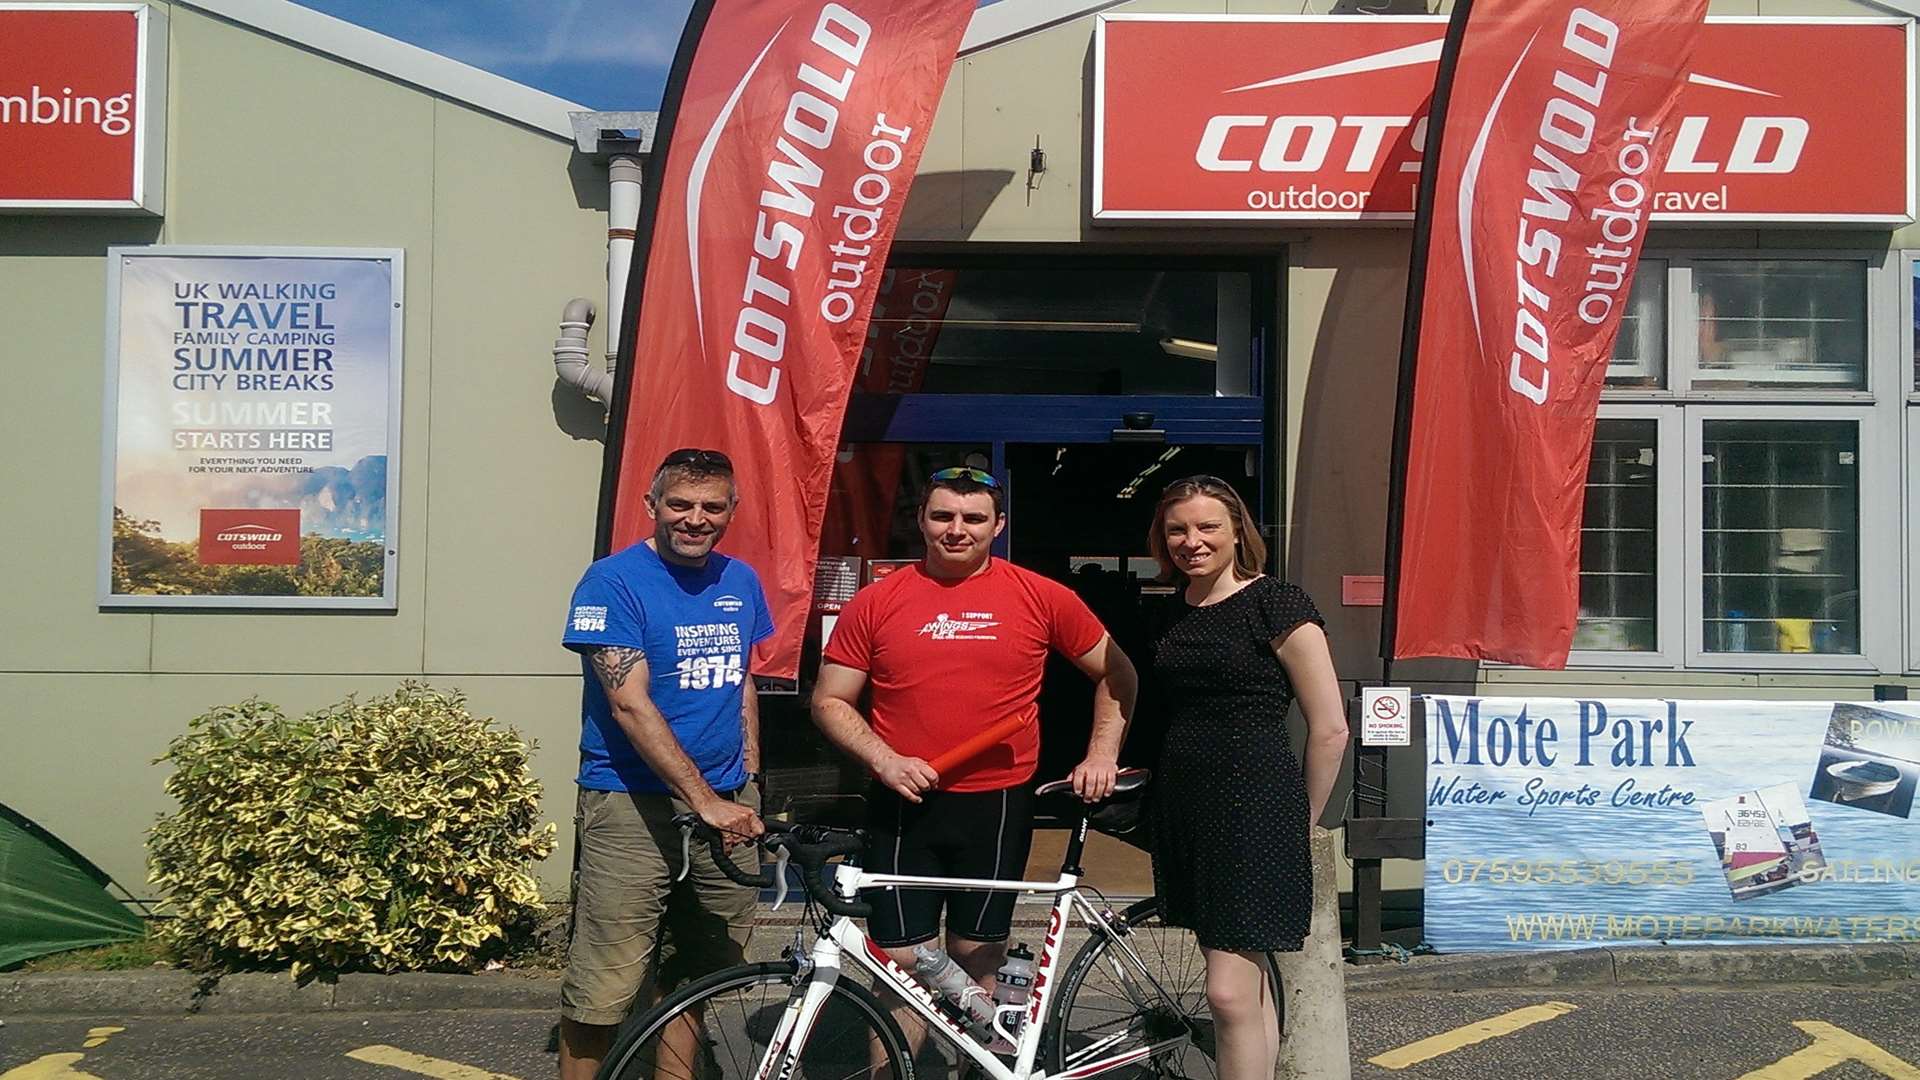 Local marketing representative Ian Foster and assistant manager John Blackman, both from Cotswold Outdoor Maidstone which is supporting the KM Charity Walk, pictured with Tracey Crouch MP.